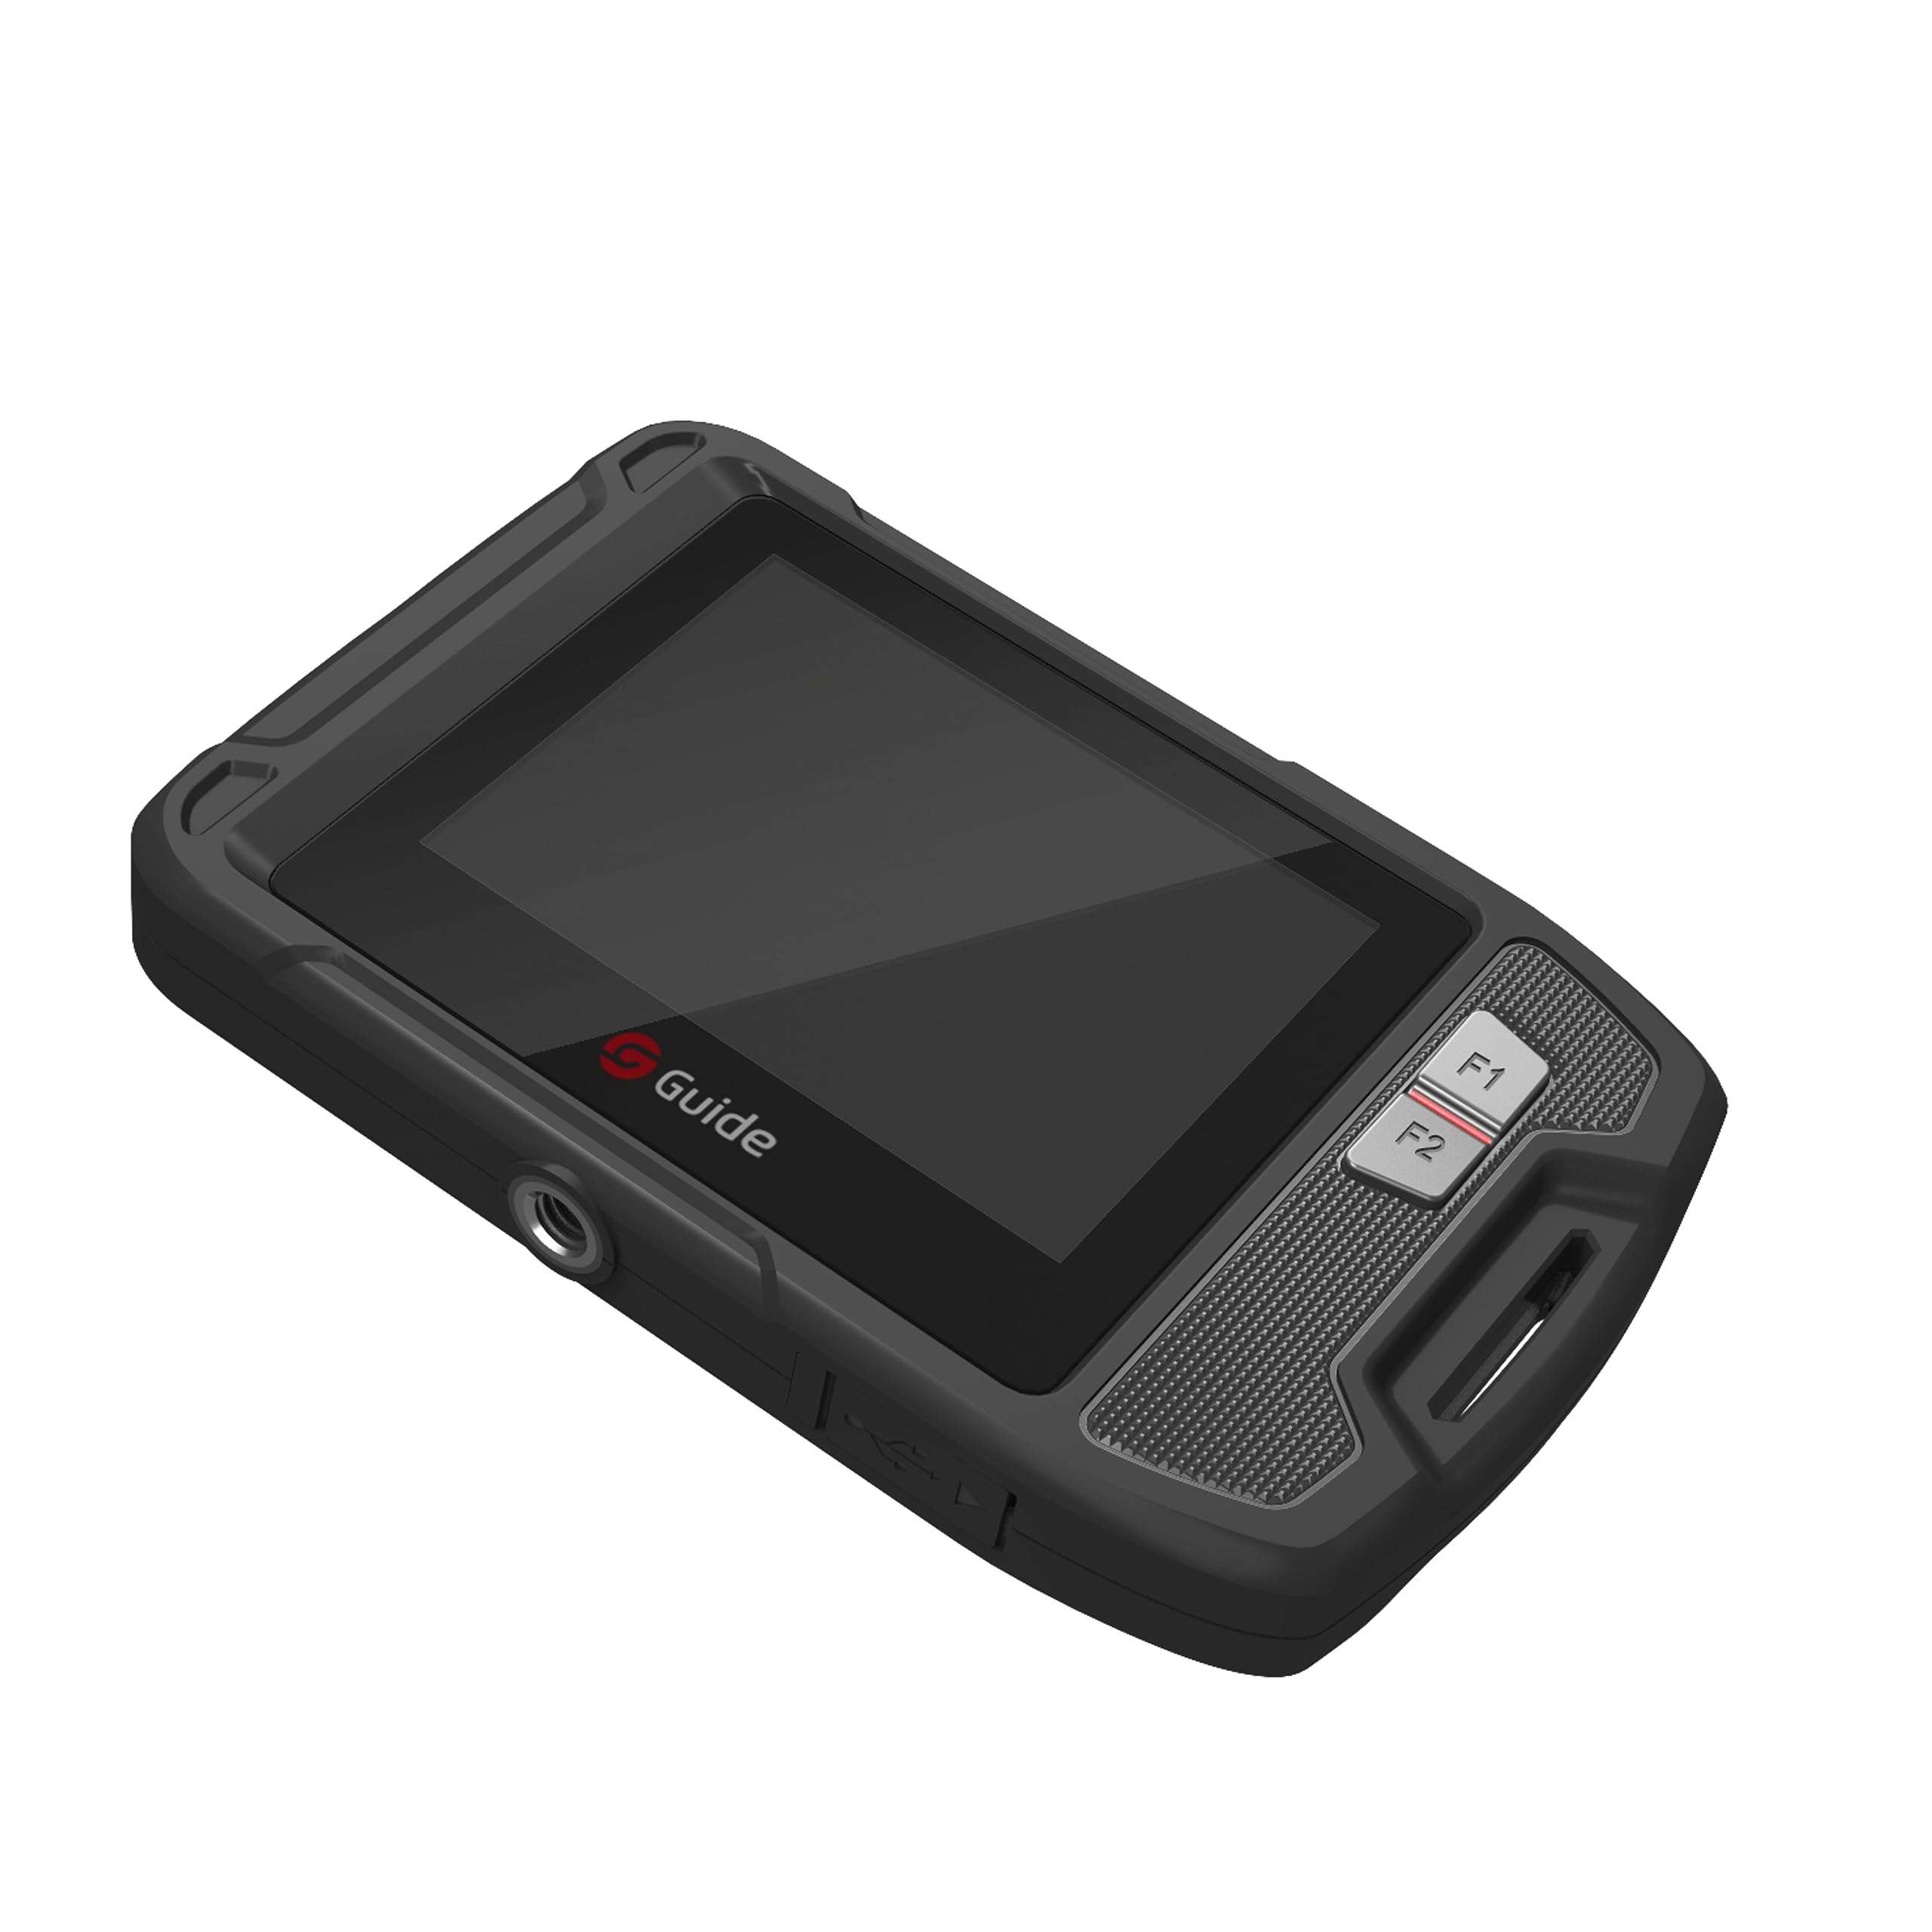 Guide P120V Pocket-Sized Thermal Camera 120x90 IR Resolution -20℃~400℃ IP54 3.5-inch LCD Touchscreen,WiFi Compact Size